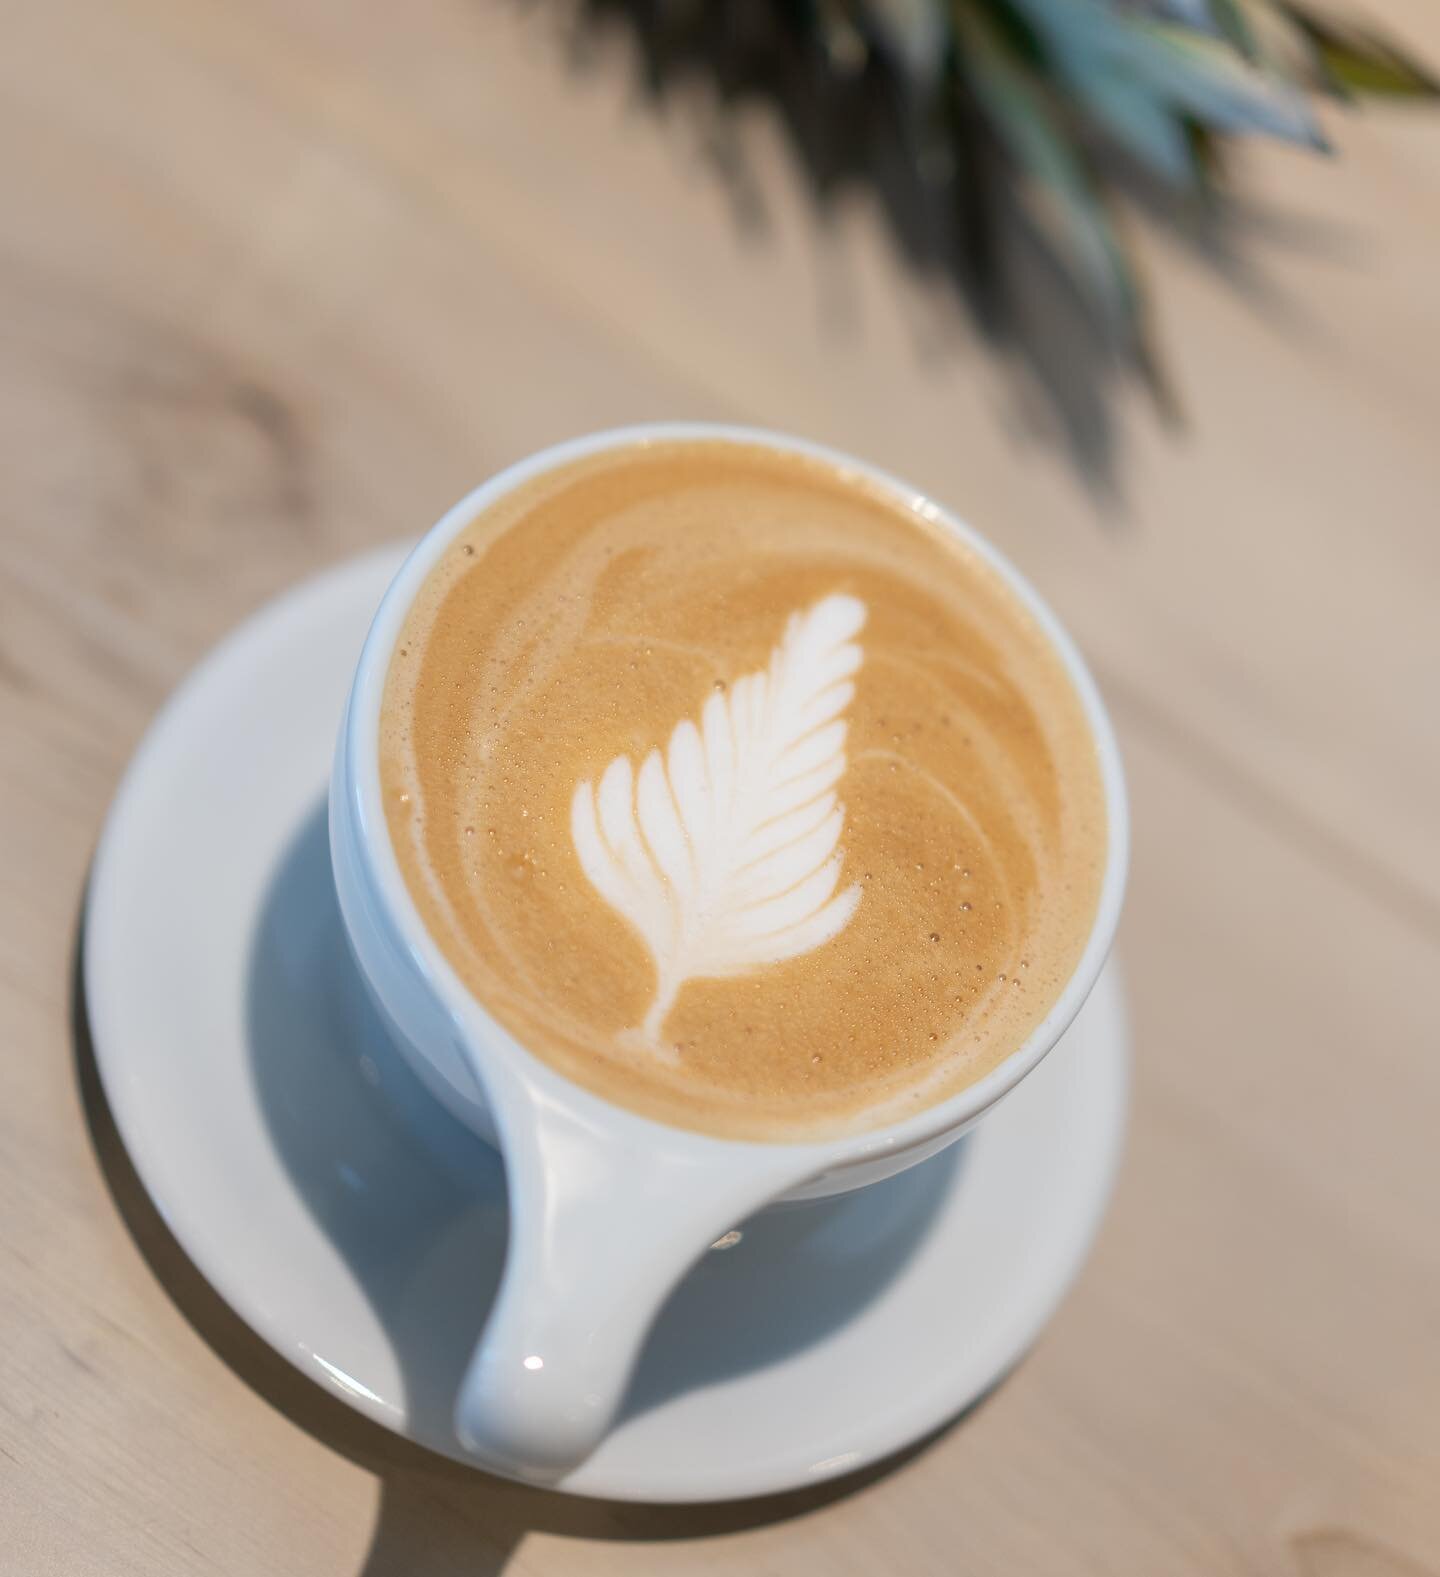 We are known for our healthy and delicious bowls and smoothies, but we make a pretty mean cup of coffee too! ☕️ If you&rsquo;re tired of the usual grind, stop by and try some of the freshest coffee in Palmer, brought to you by @blackcupcdm
.
.
.
.
.
